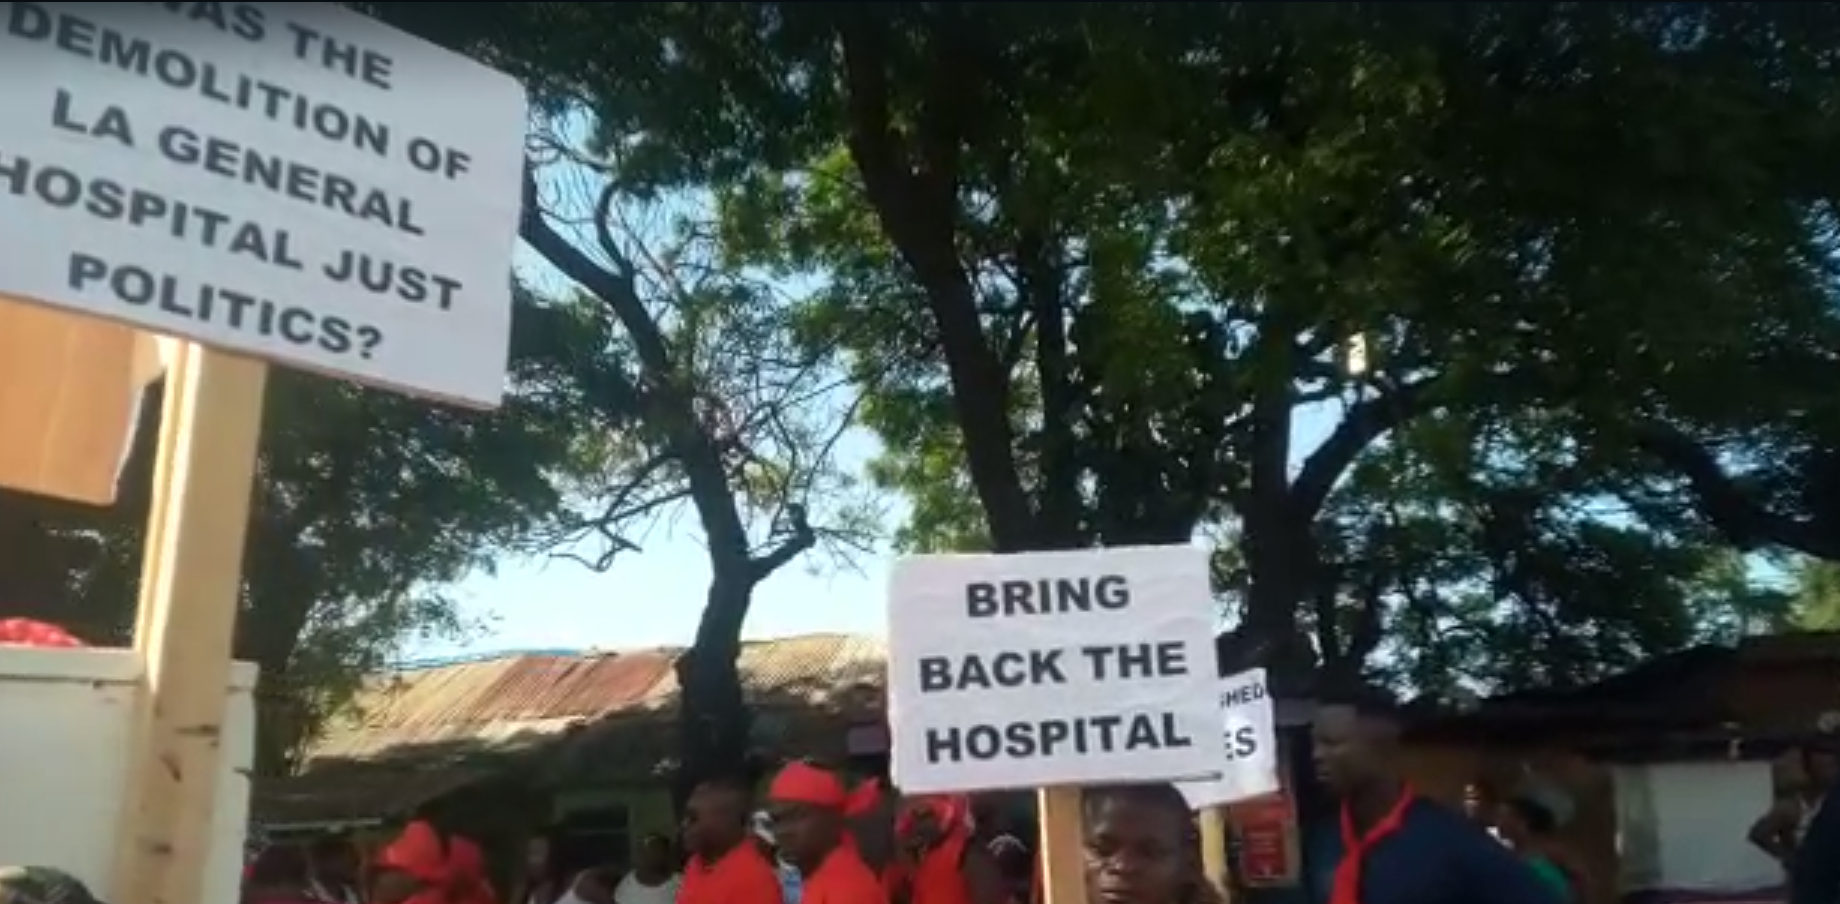 La residents demonstrate again over stalled General Hospital project